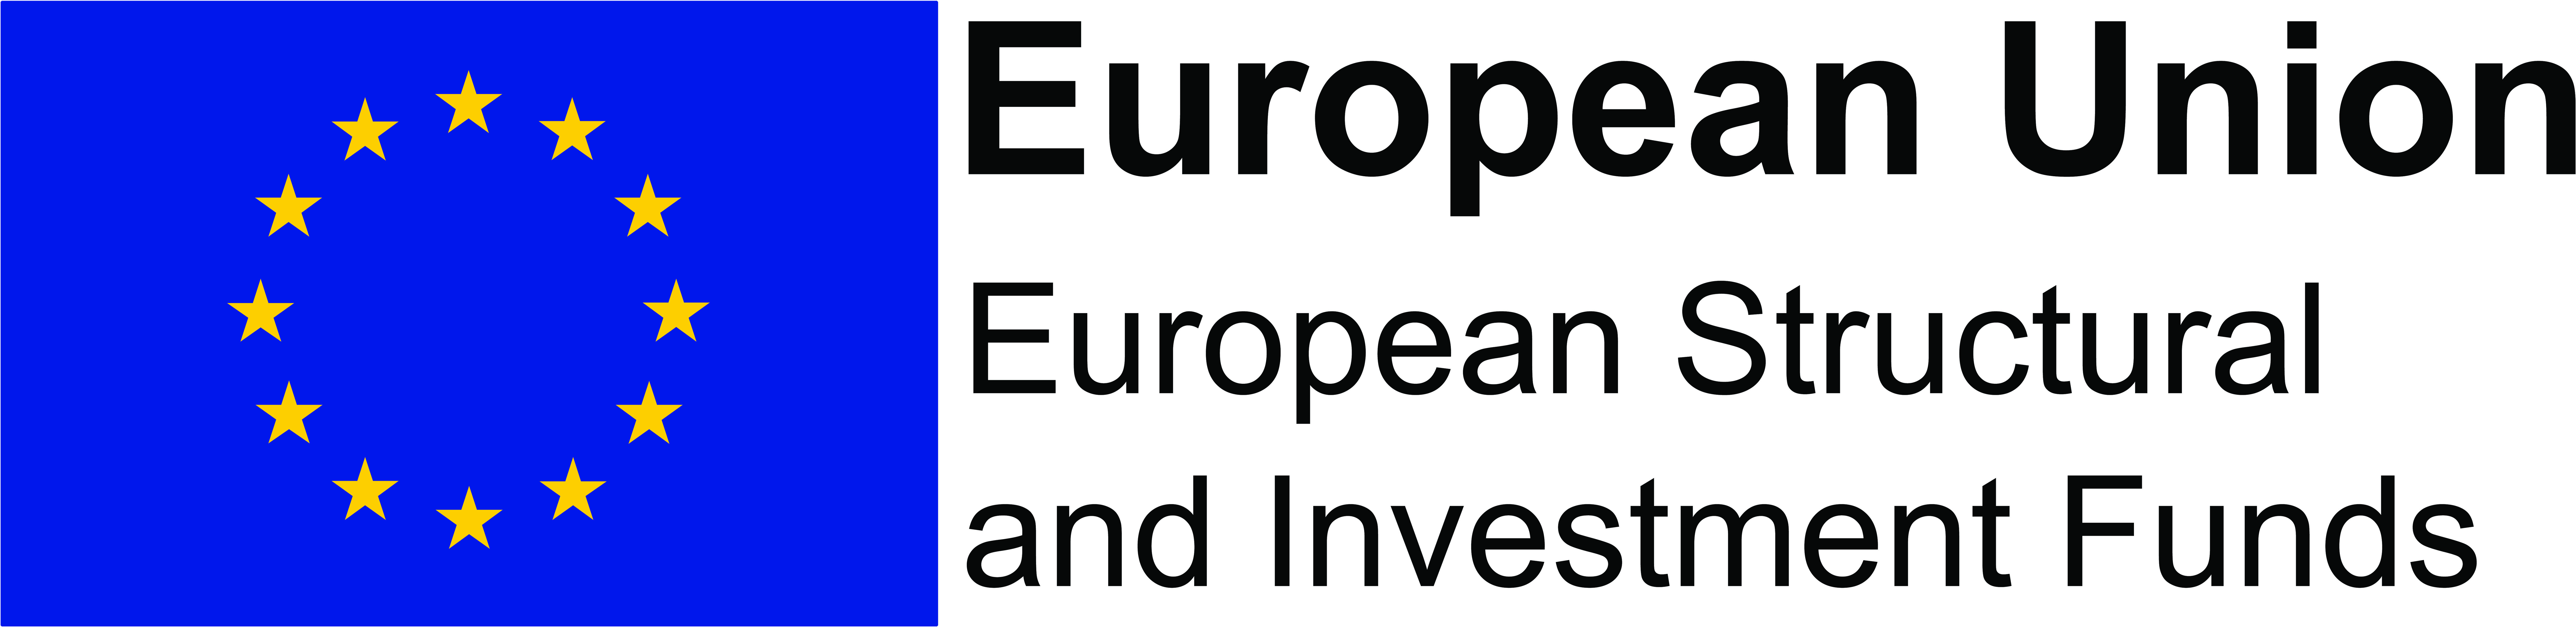 European Union European Structural and Investment Funds